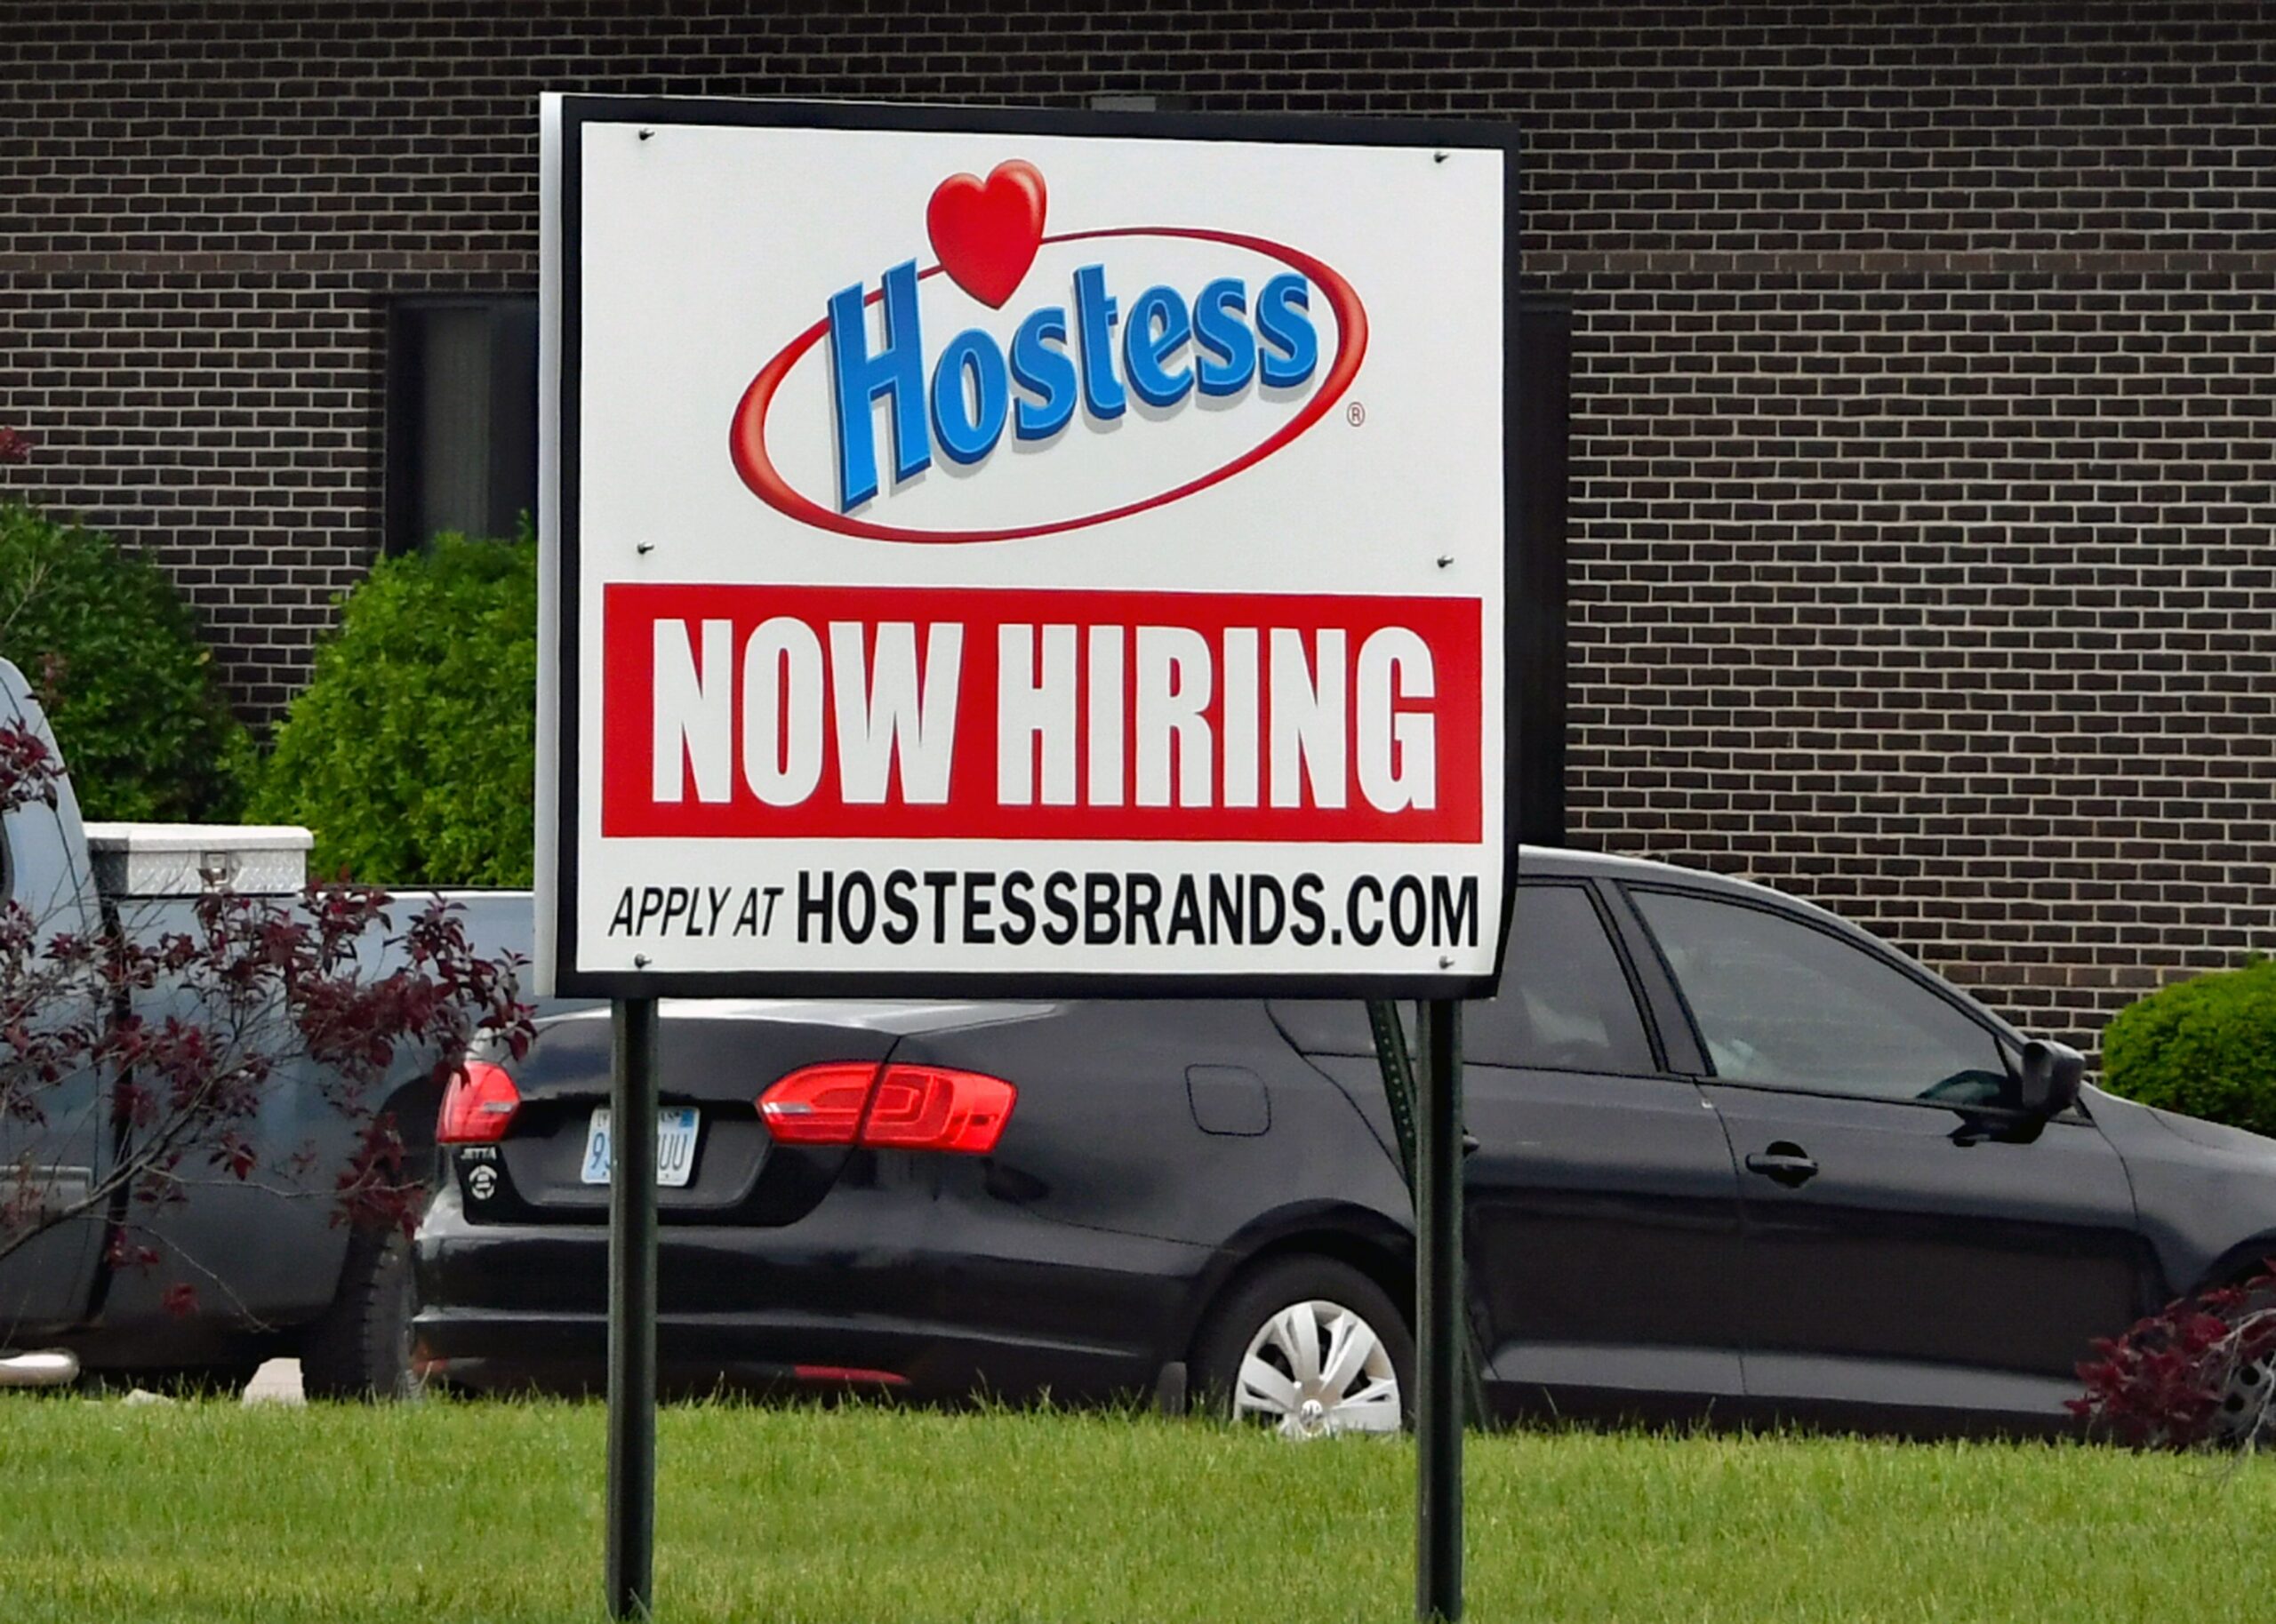 Hostess plant where Twinkies snack cakes are produced now hiring signs at location